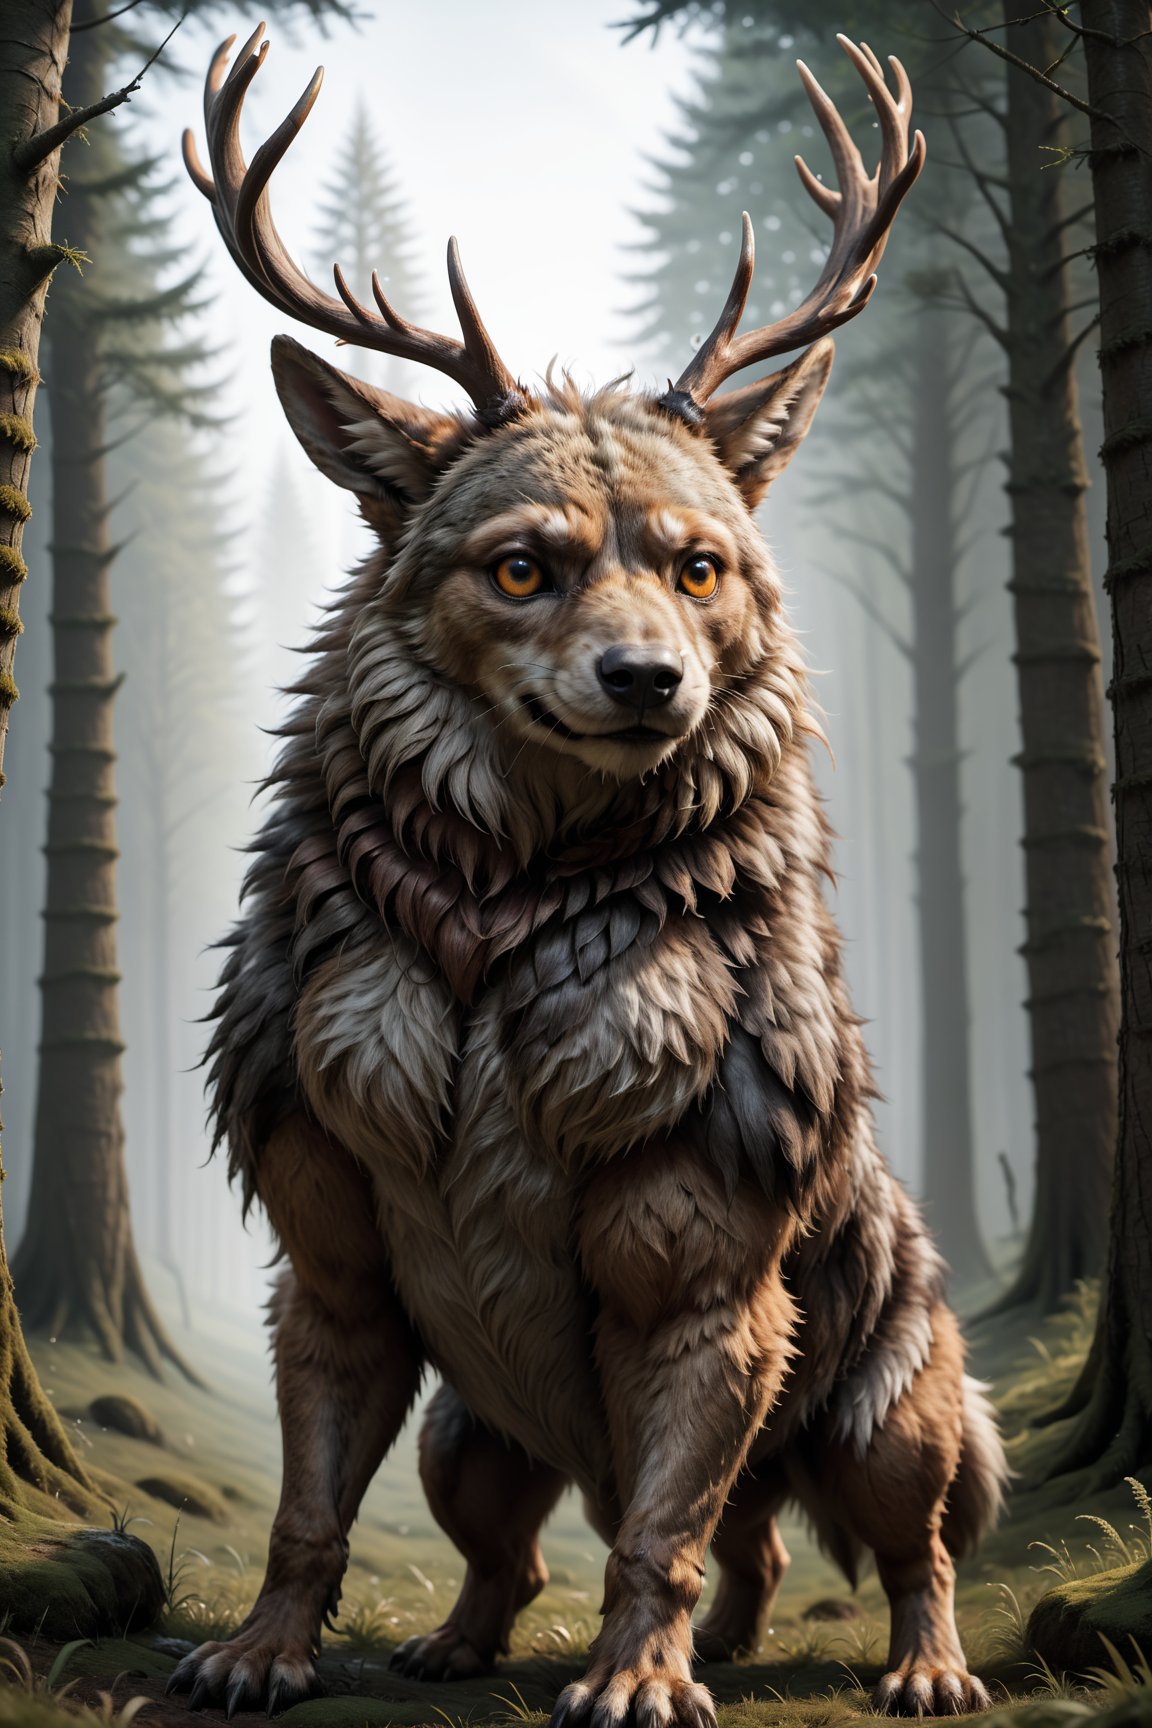 (masterpiece, photorealistic:1.35), (CGI image of a Wolpertinger:1.65), (majestic creature), (the Wolpertinger's fur, created with exquisite details:1.25), (the Wolpertinger's eyes glow:1.31), (the Wolpertinger stands gracefully on a wide meadow:1.1), (the Wolpertinger has a antlers on its head:1.5), (Blender CGI software that can create breathtaking photorealistic scenes:1.2), (surrounded by the quiet beauty of the forest:1.1), (highly detailed landscape:1.25), (the captivating look of the Wolpertinger:1.1), beautiful color correction, Unreal Engine, super resolution, megapixels,




8k wallpaper, awesome, (((masterpiece))), (((best quality))), ((ultra detailed)), (illustration), dynamic angle,